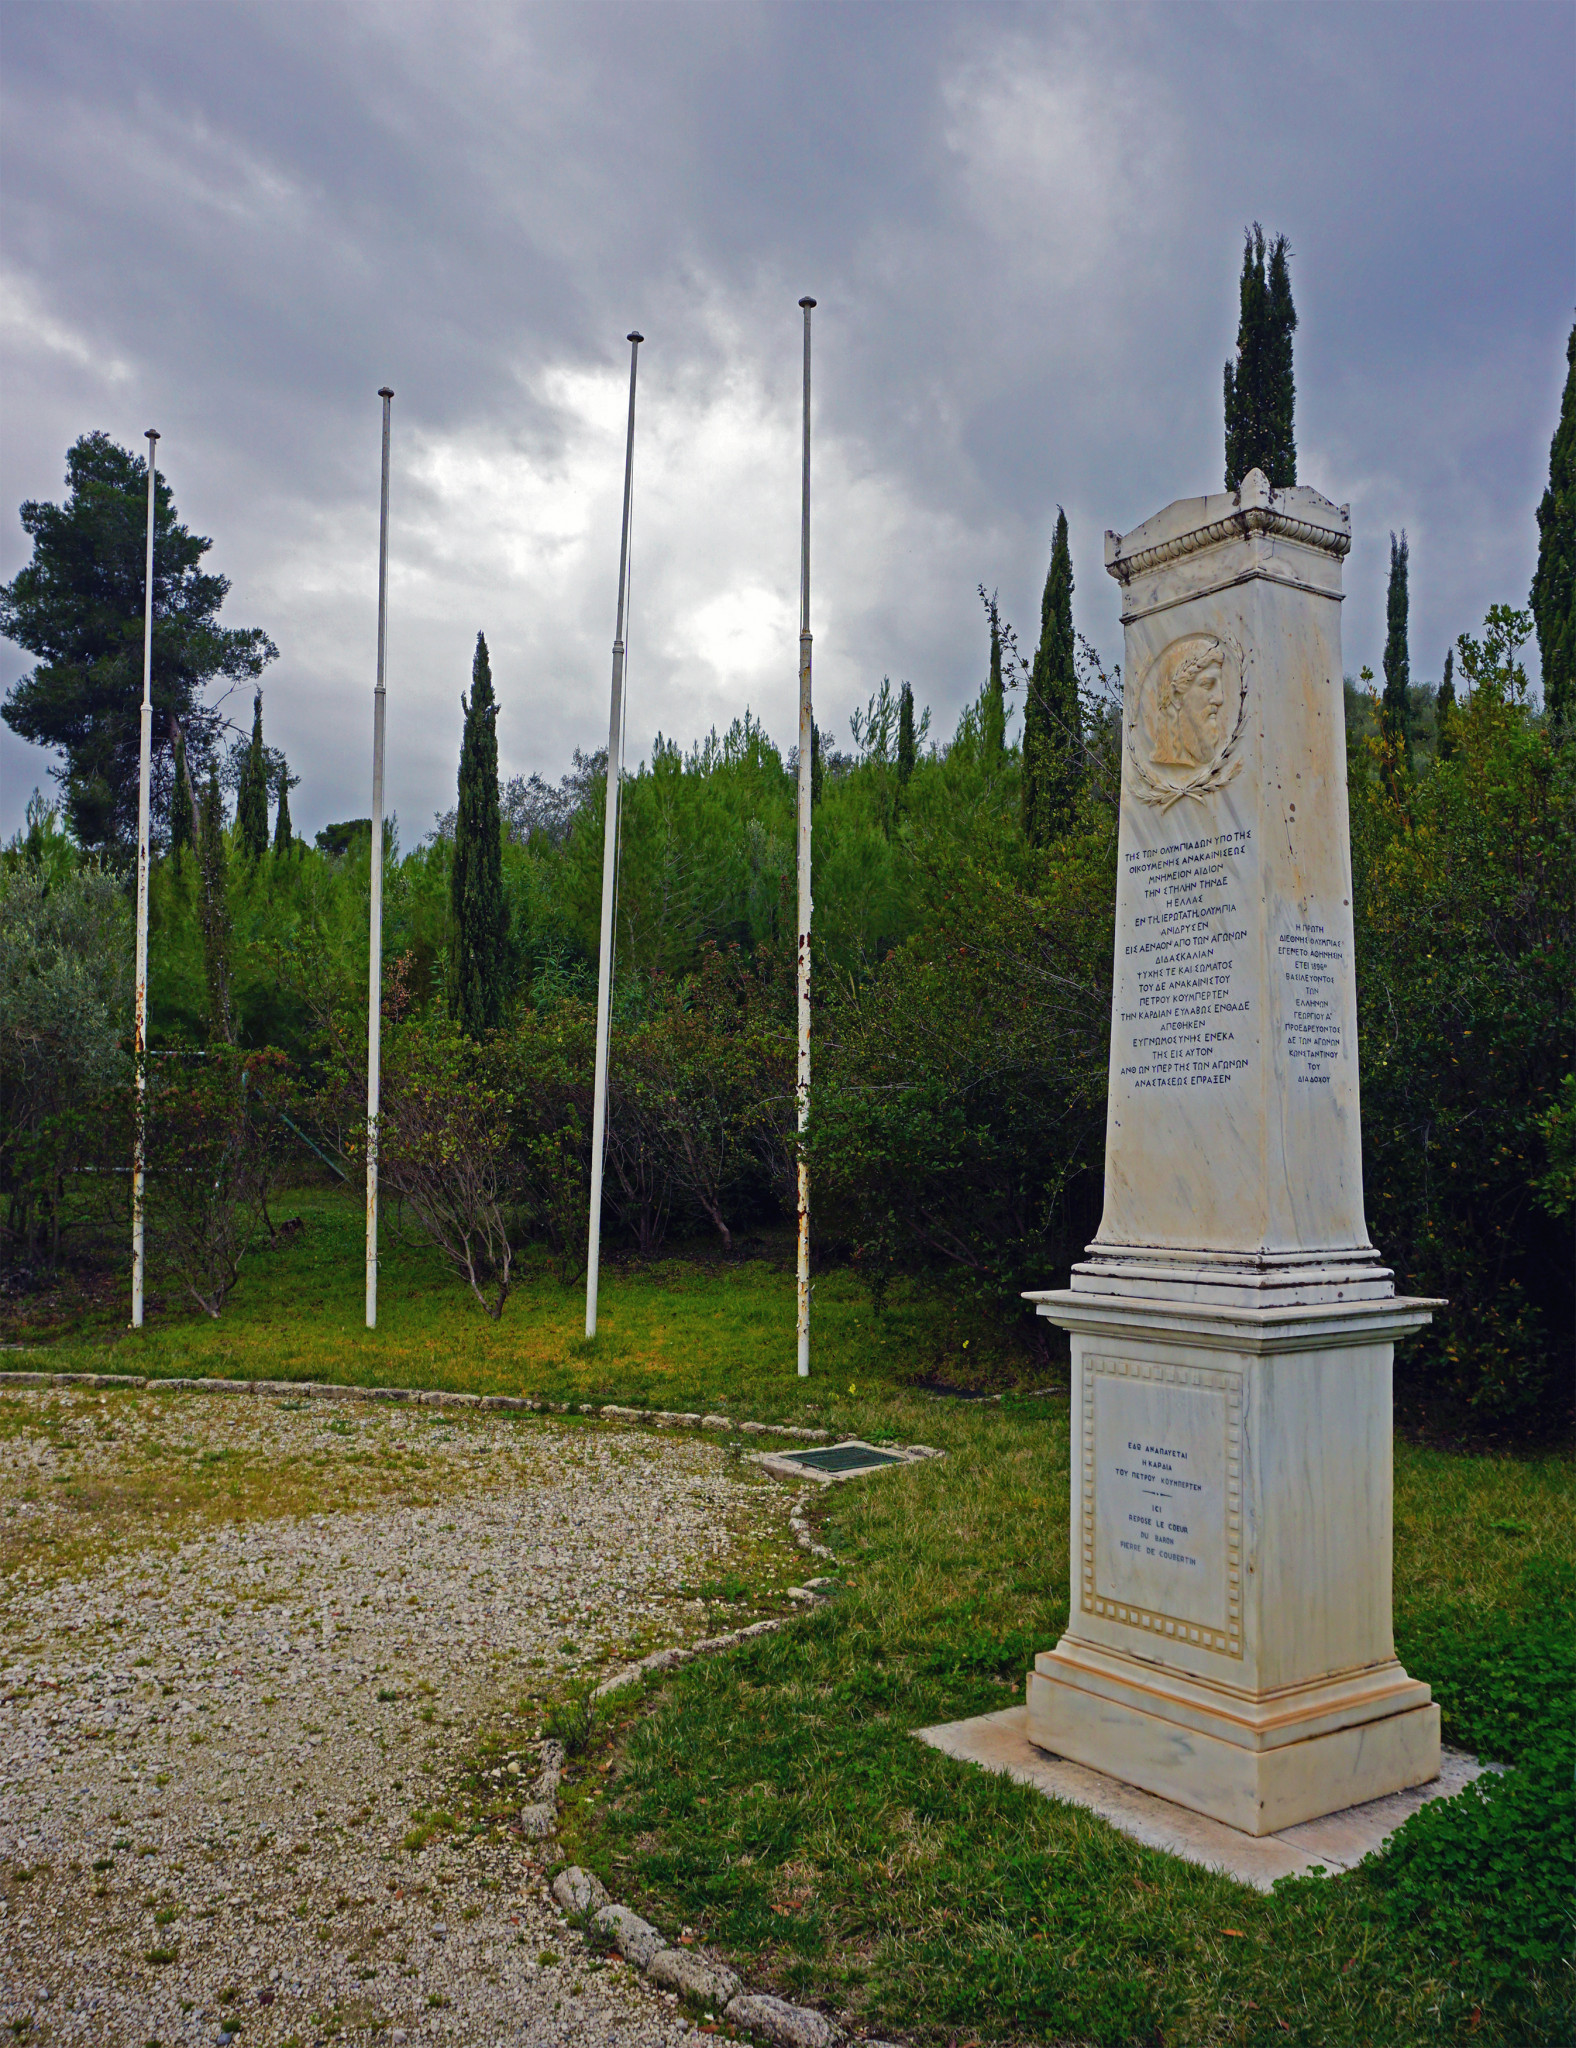 Greek IOC member Count Alexandros Mercati 
ensured the wish of Baron Pierre de Coubertin, founder of the modern Olympic Movement, that his heart was interred in Ancient Olympia ©Wikipedia